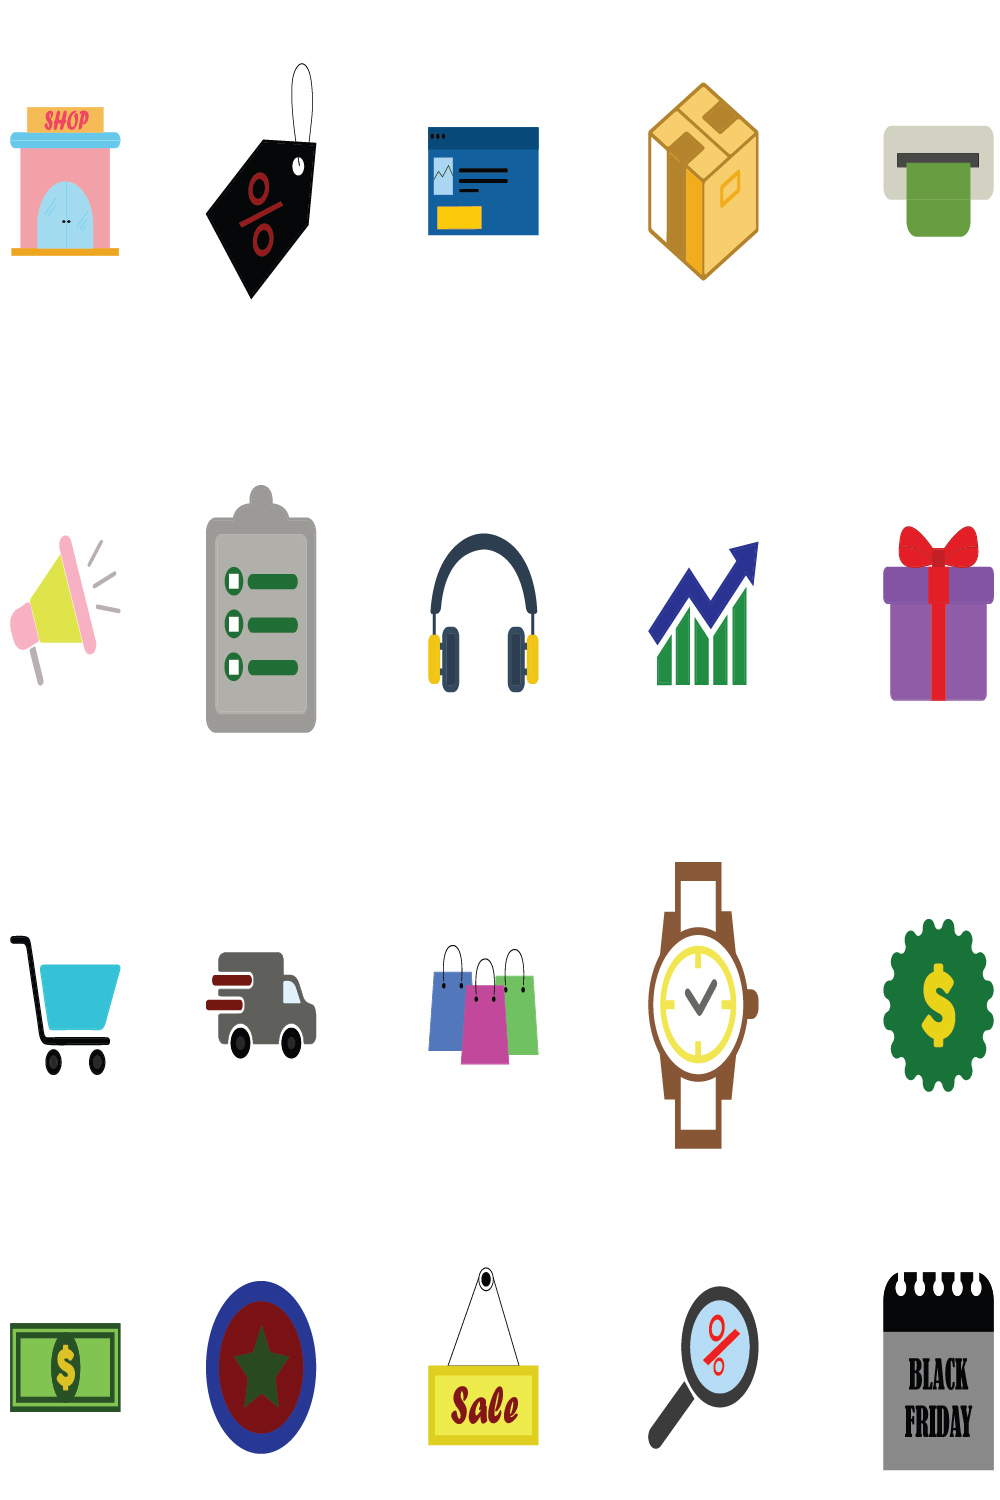 Black Friday Flat Icon Pack - pinterest image preview.